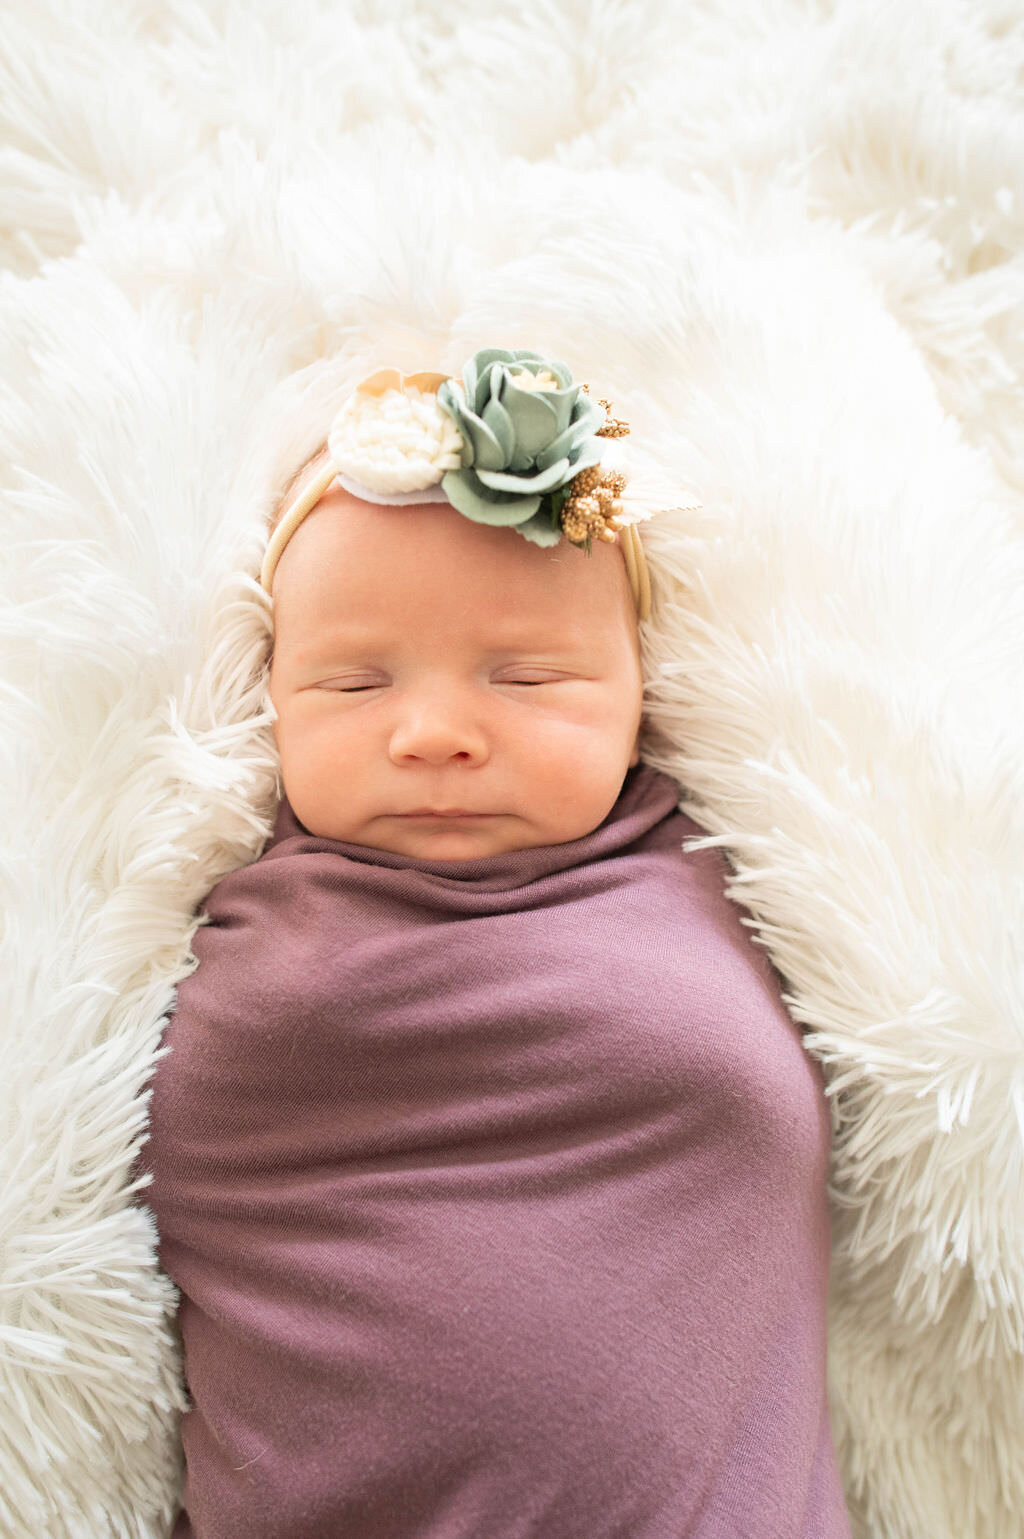 A newborn wrapped up tightly in a purple blanket.